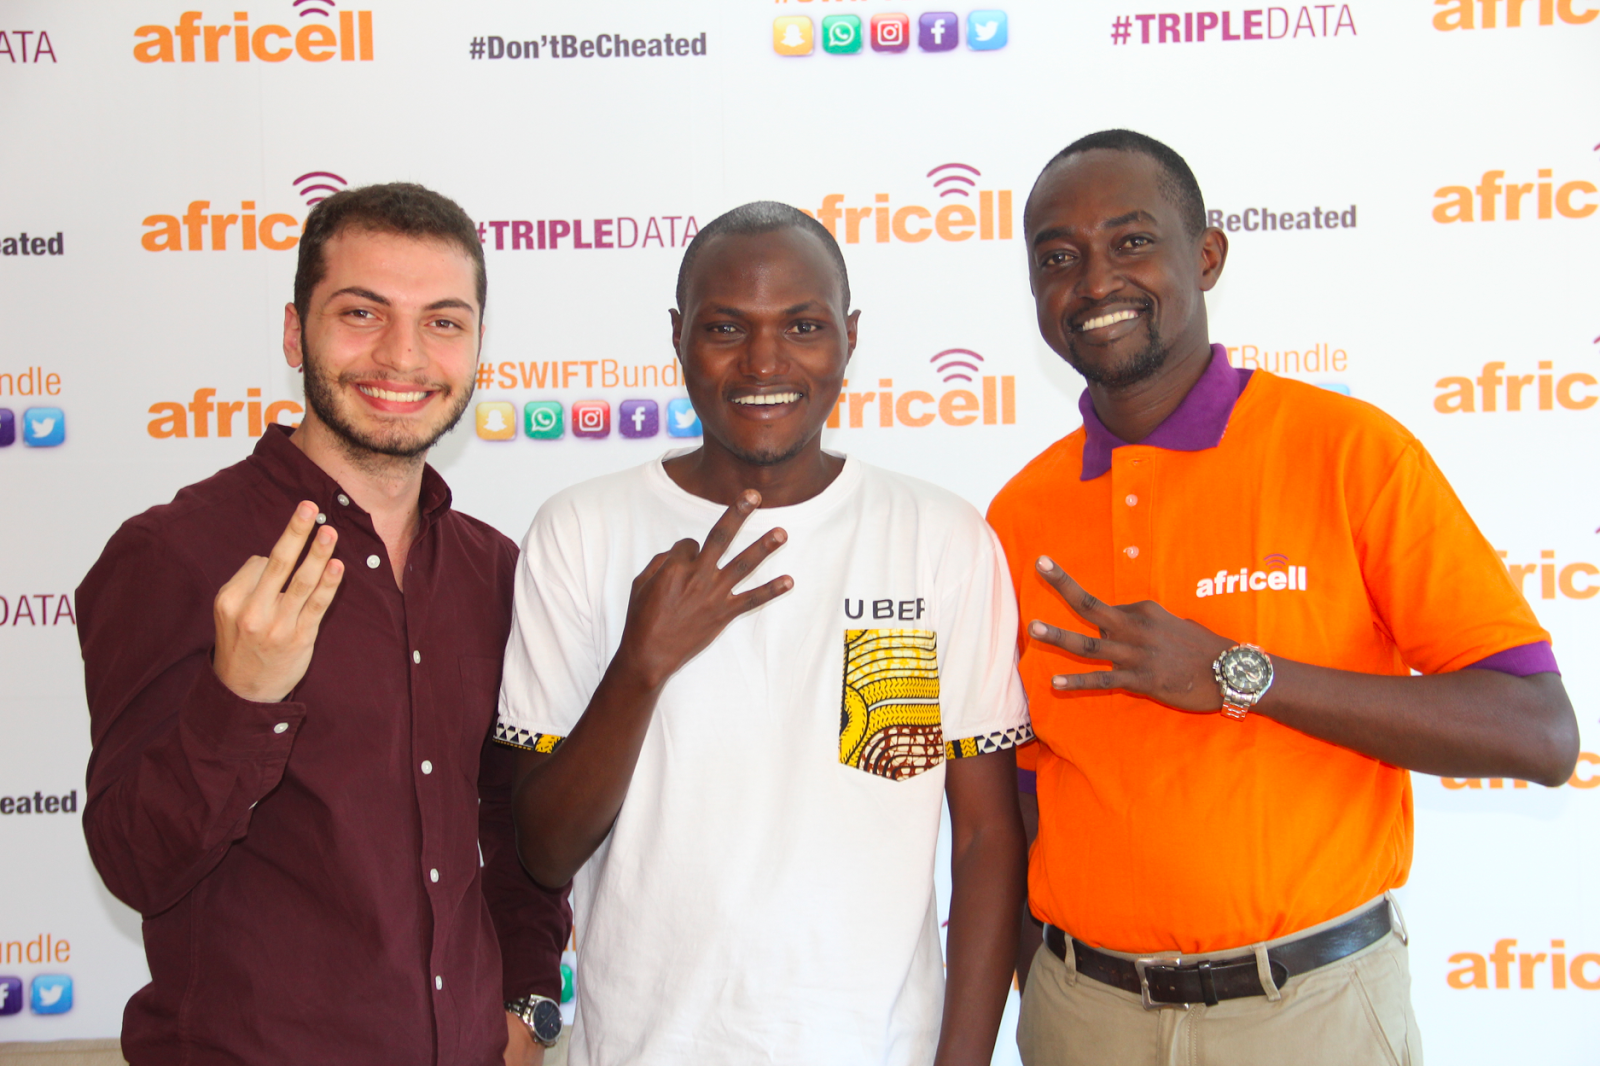 Uber, Africell Partner to Offer Free Rides to Kampala Residents